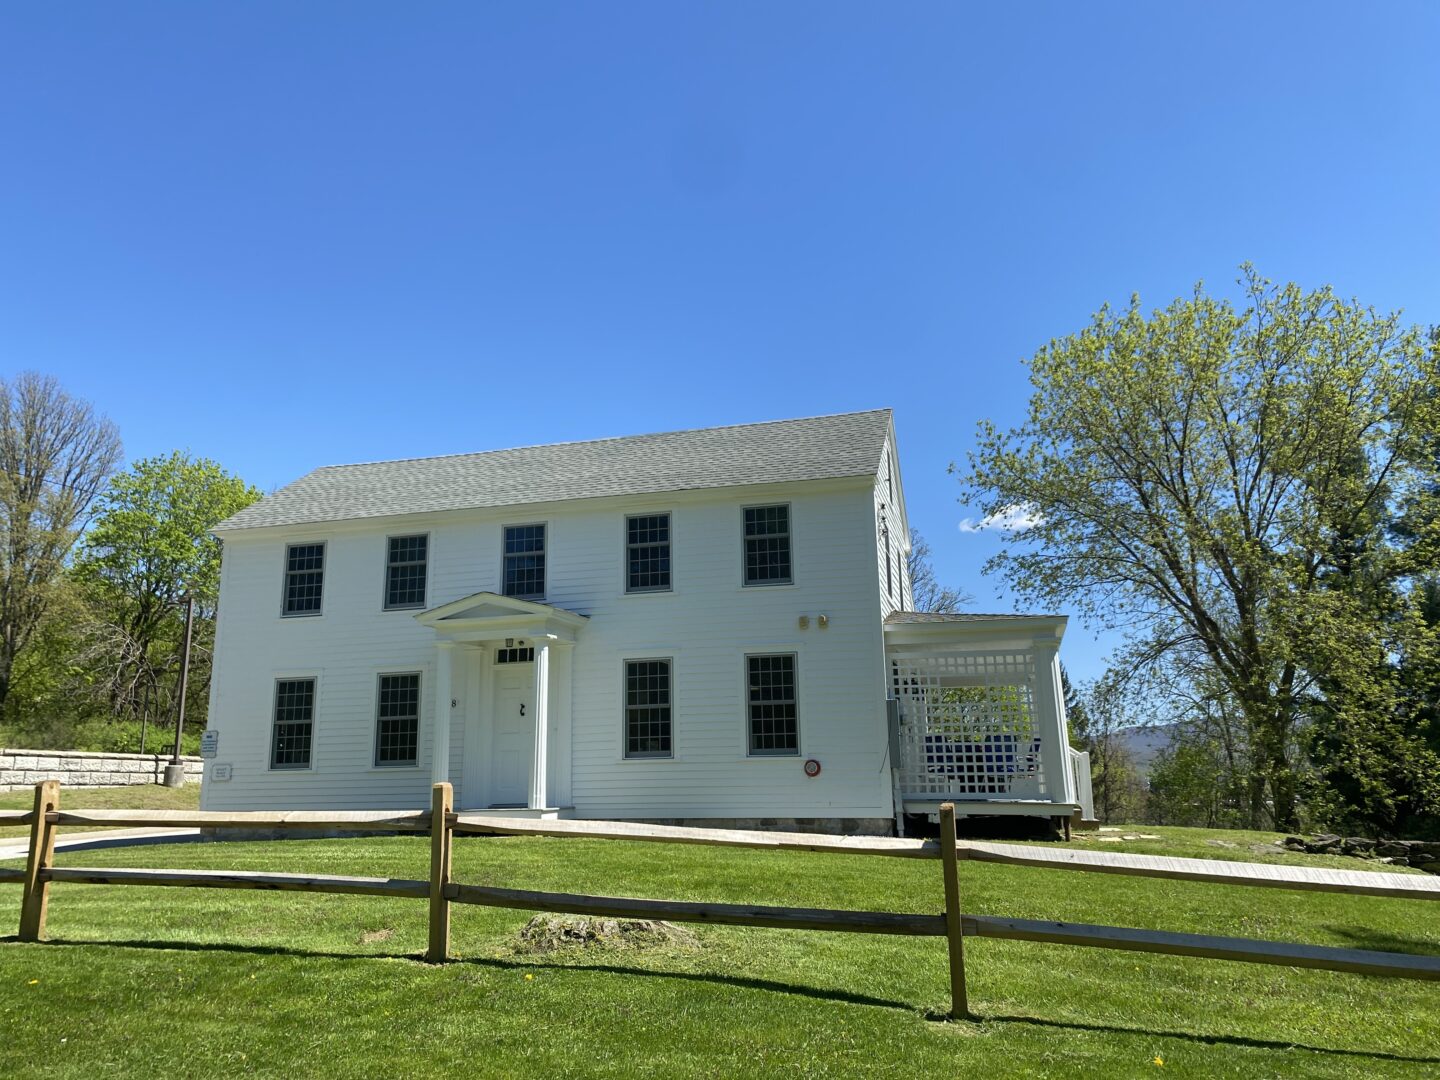 historic white house with a front door including two  pillars. Wooden fence and green grass in the foreground. Blue sky day.